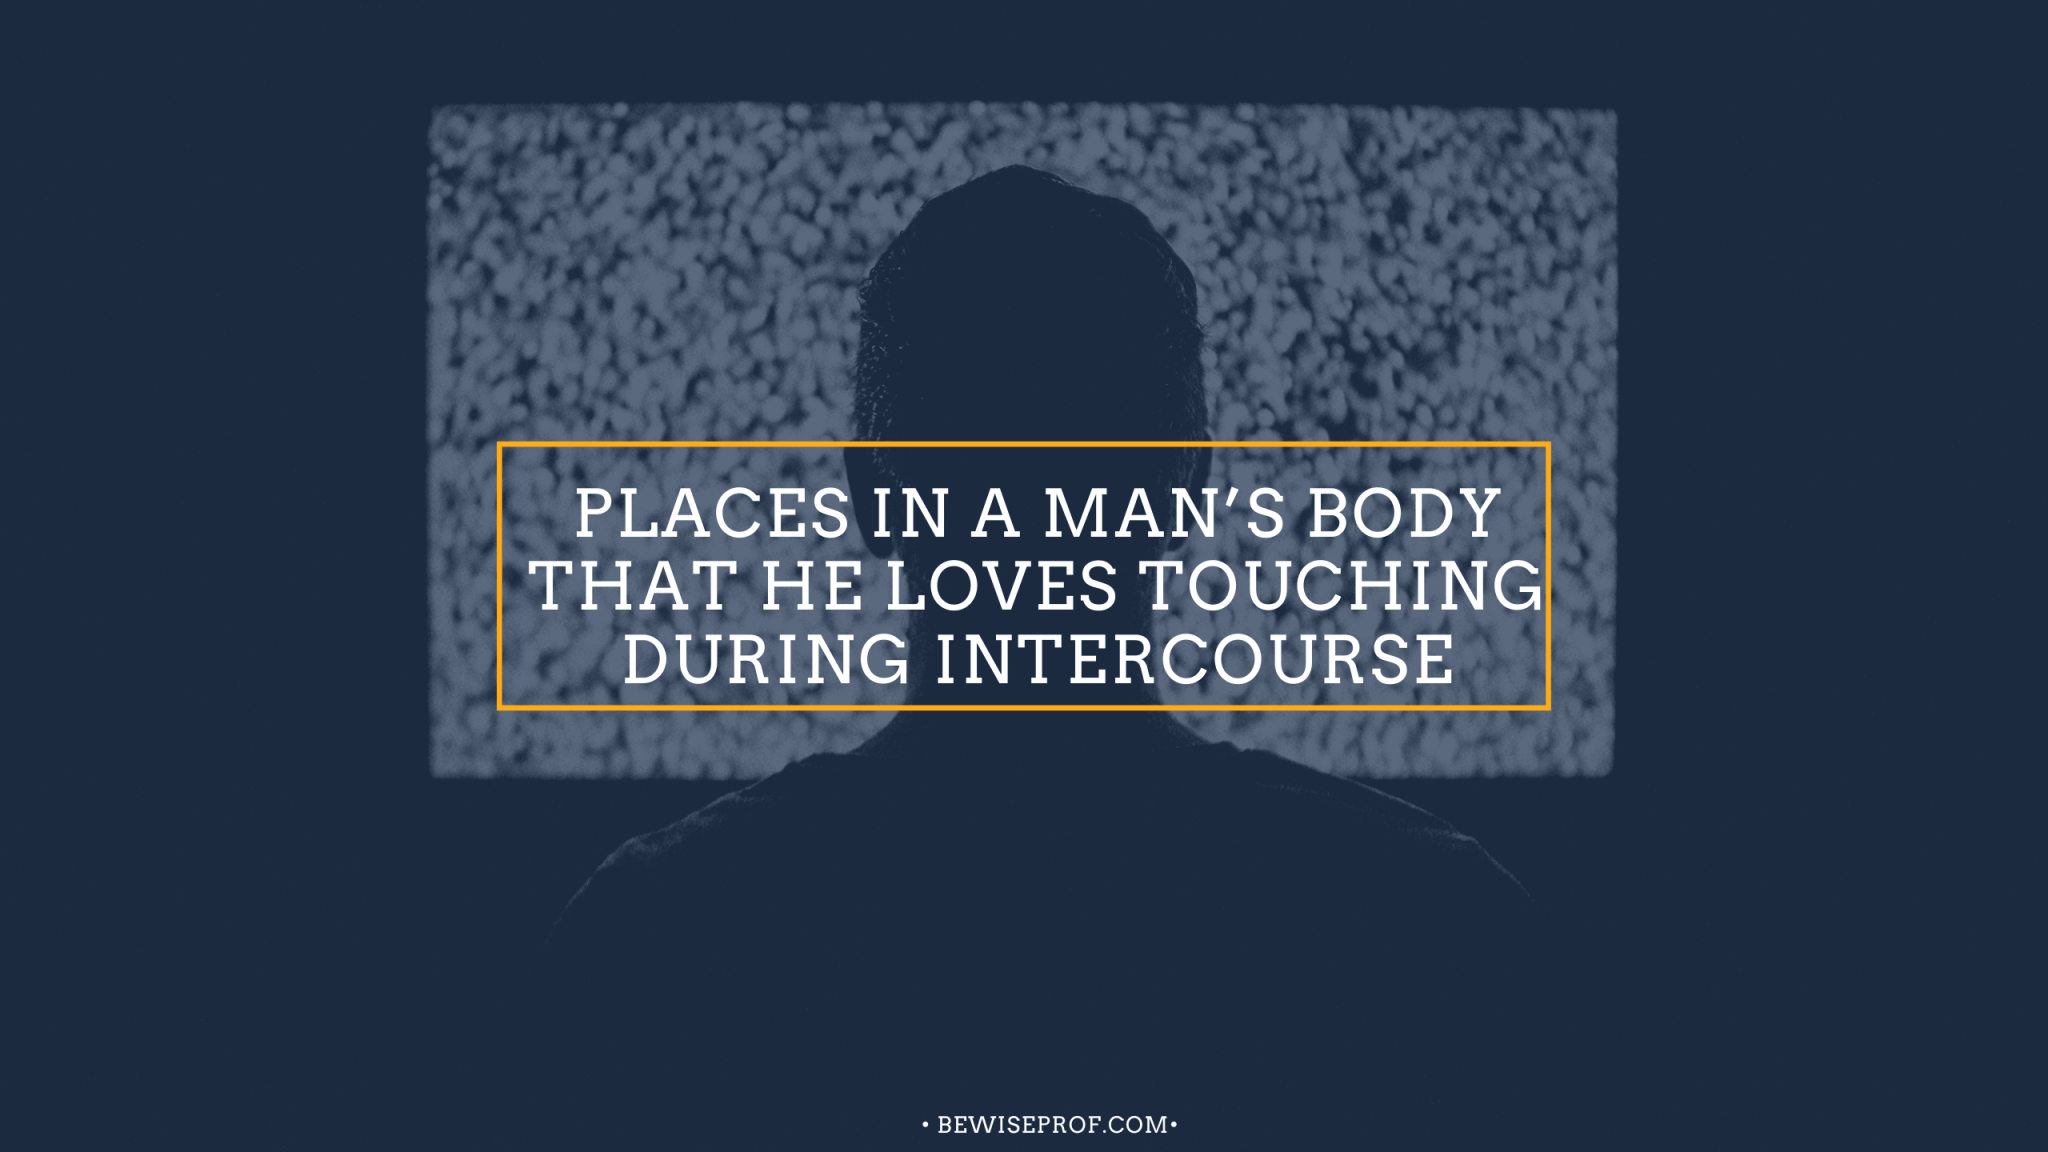 Places in a Man’s Body That he loves touching during intercourse